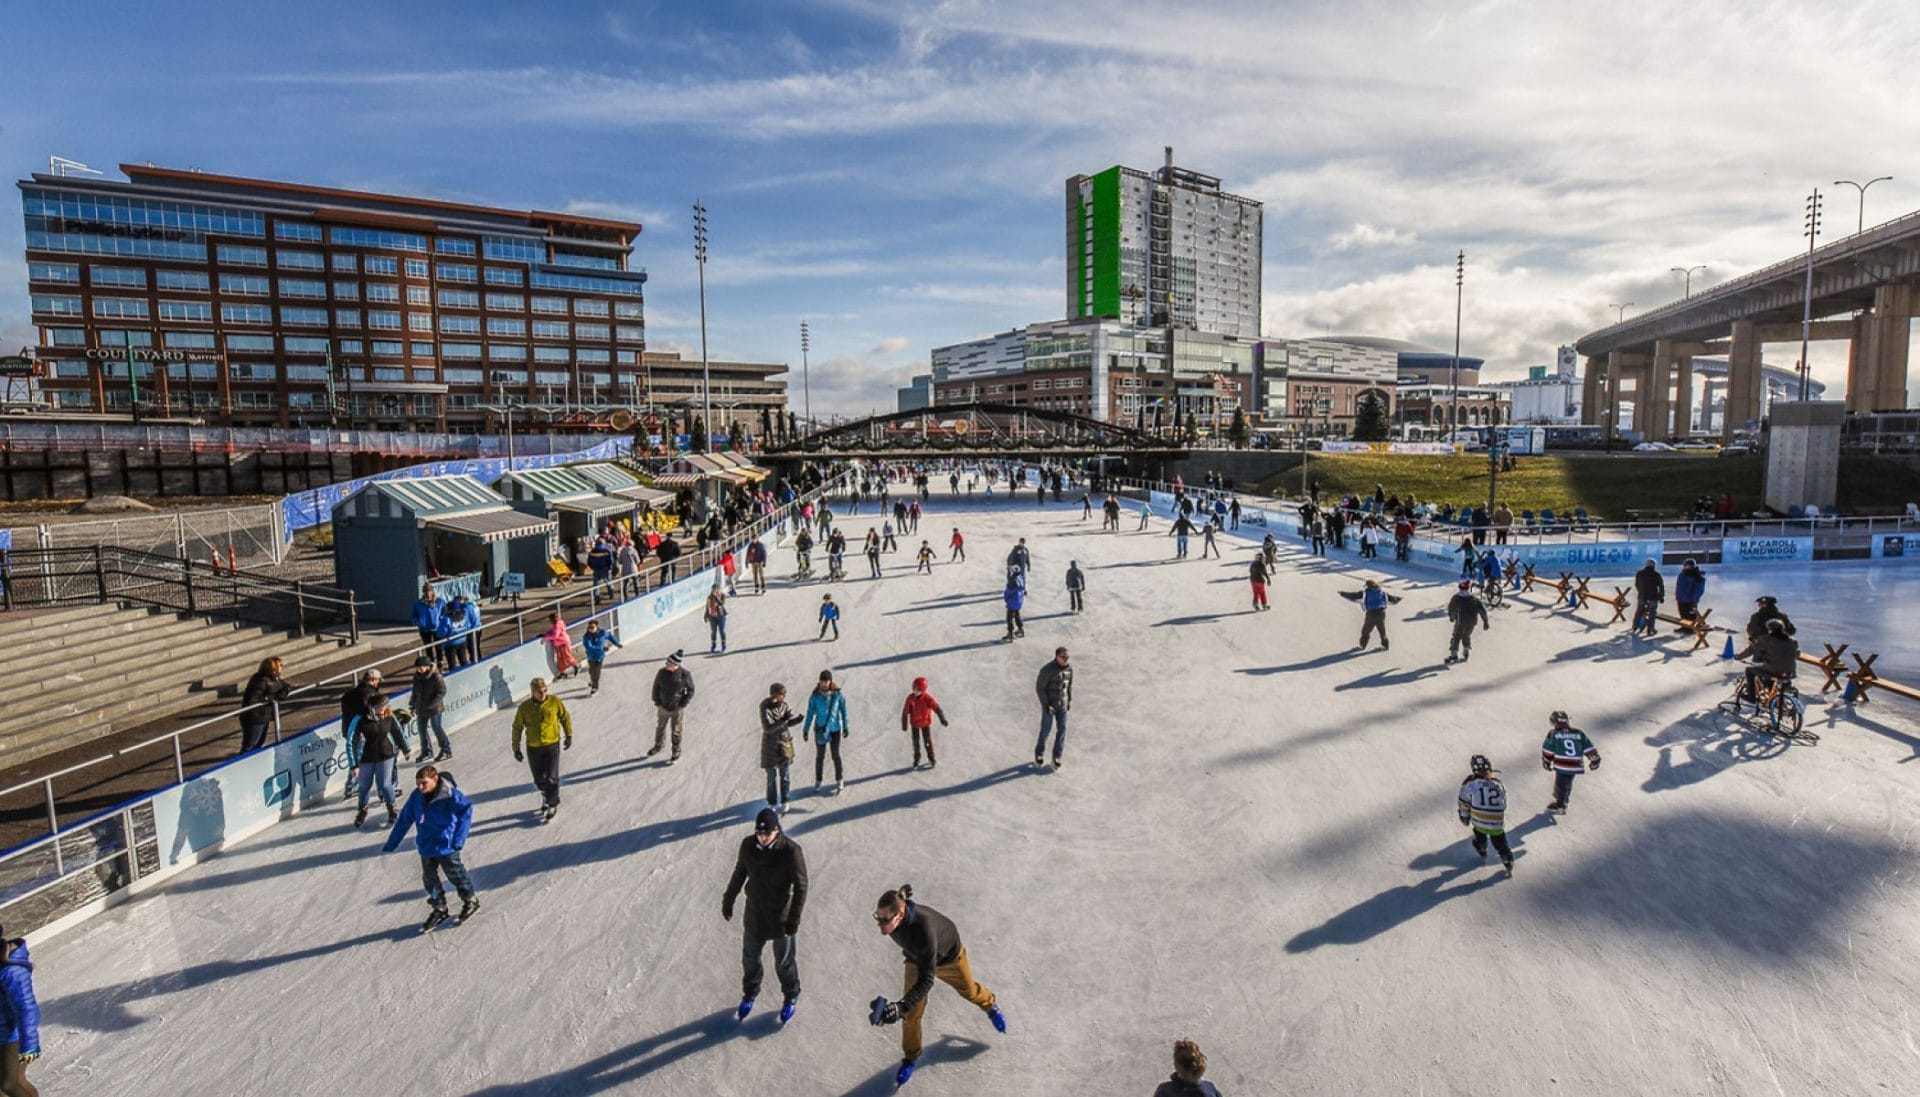 The Ice at Canalside